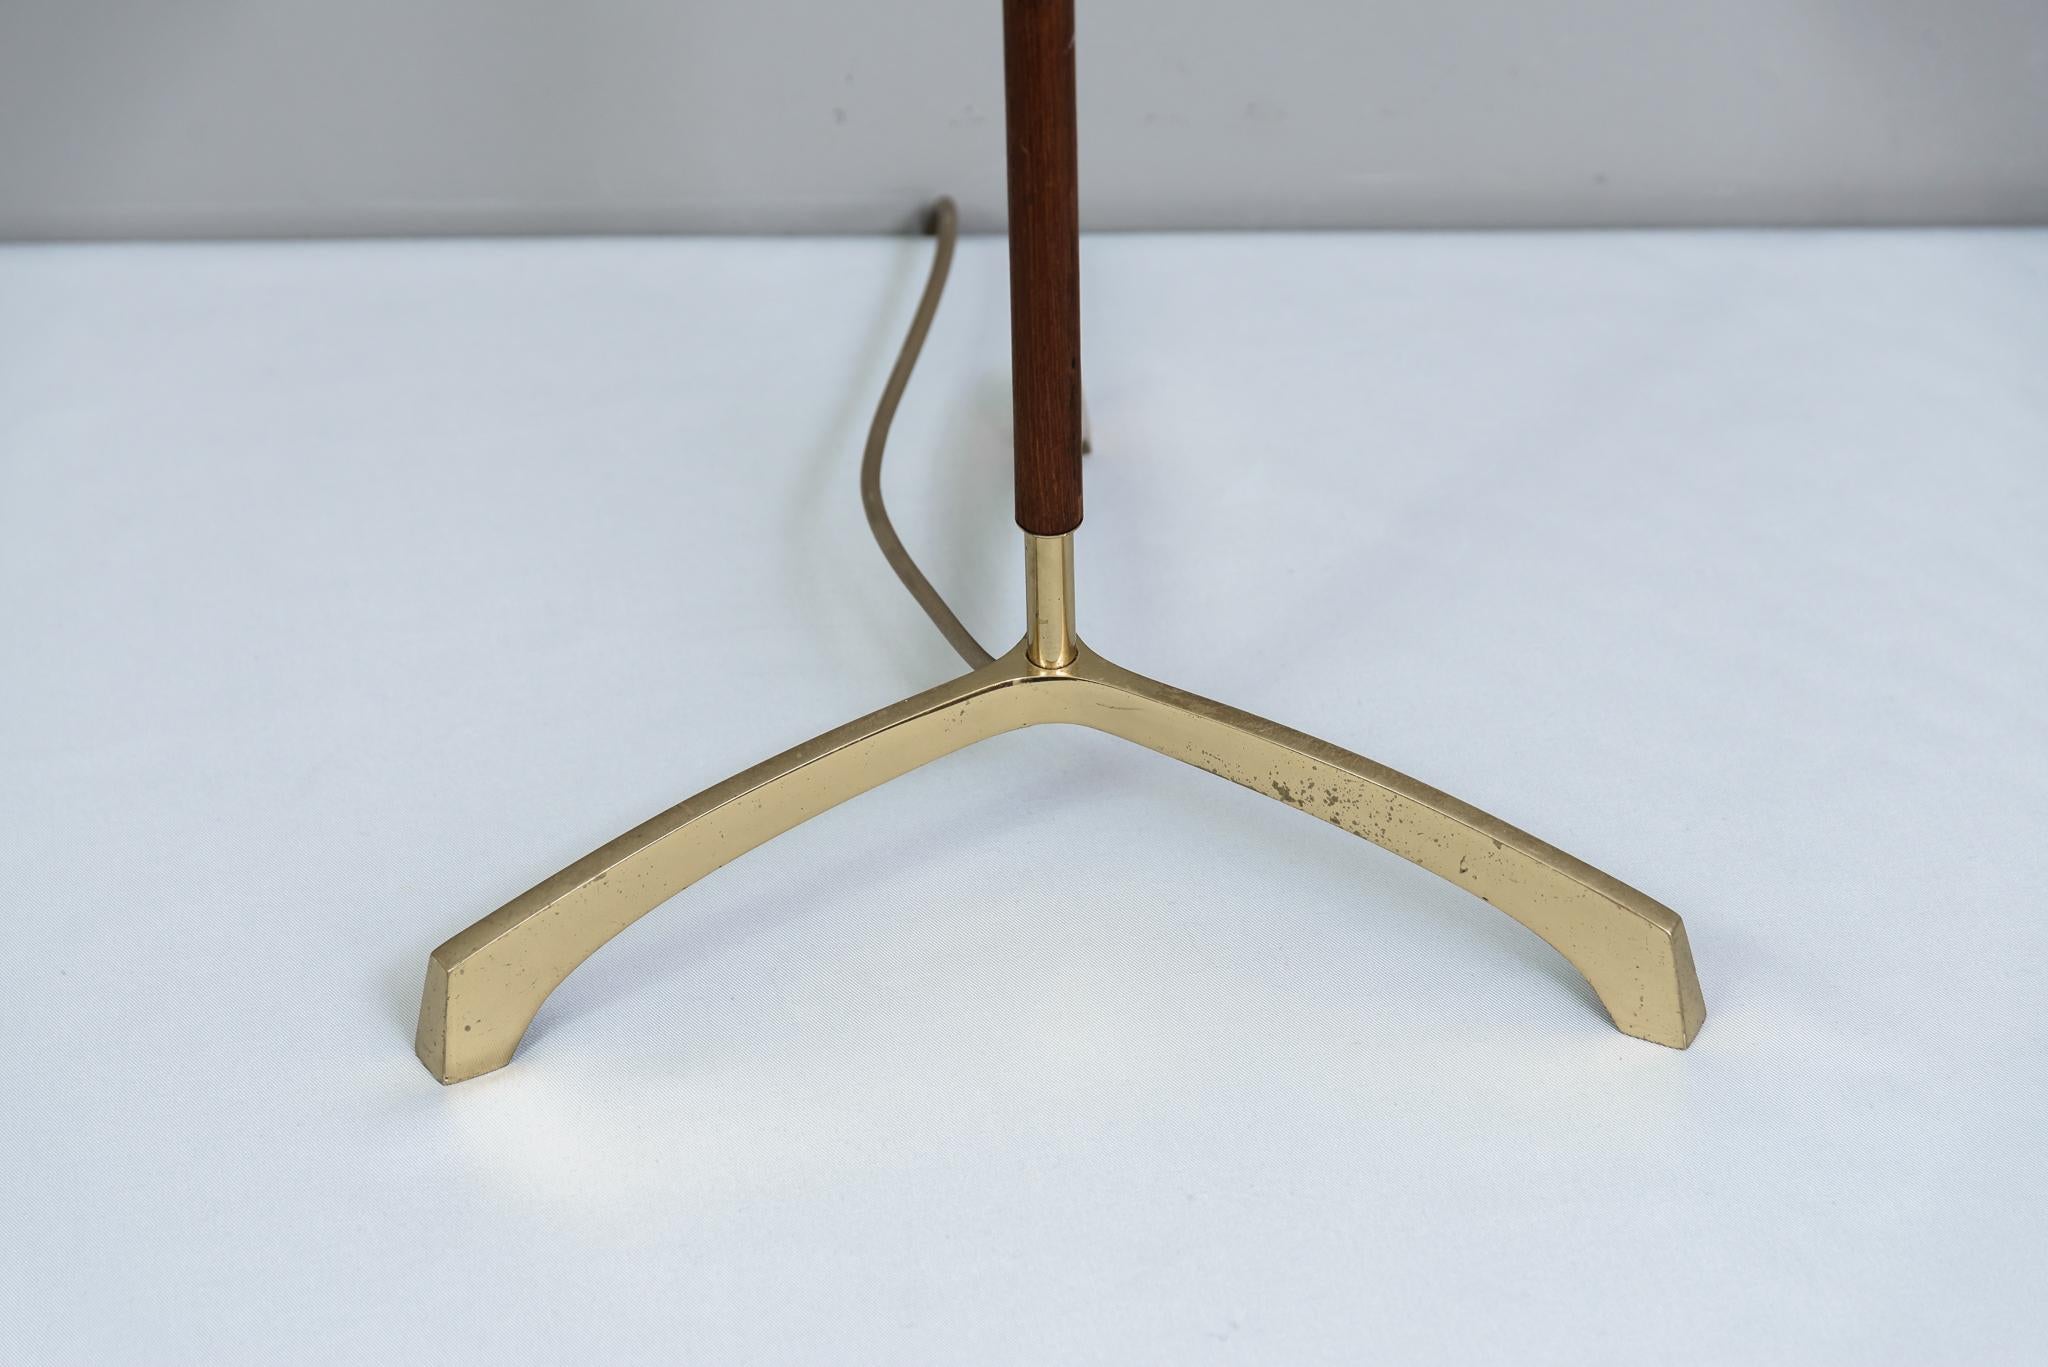 Floor lamp by Rupert Nikoll circa 1950s
Wood and brass stem
Original condition
Only the shade is new.